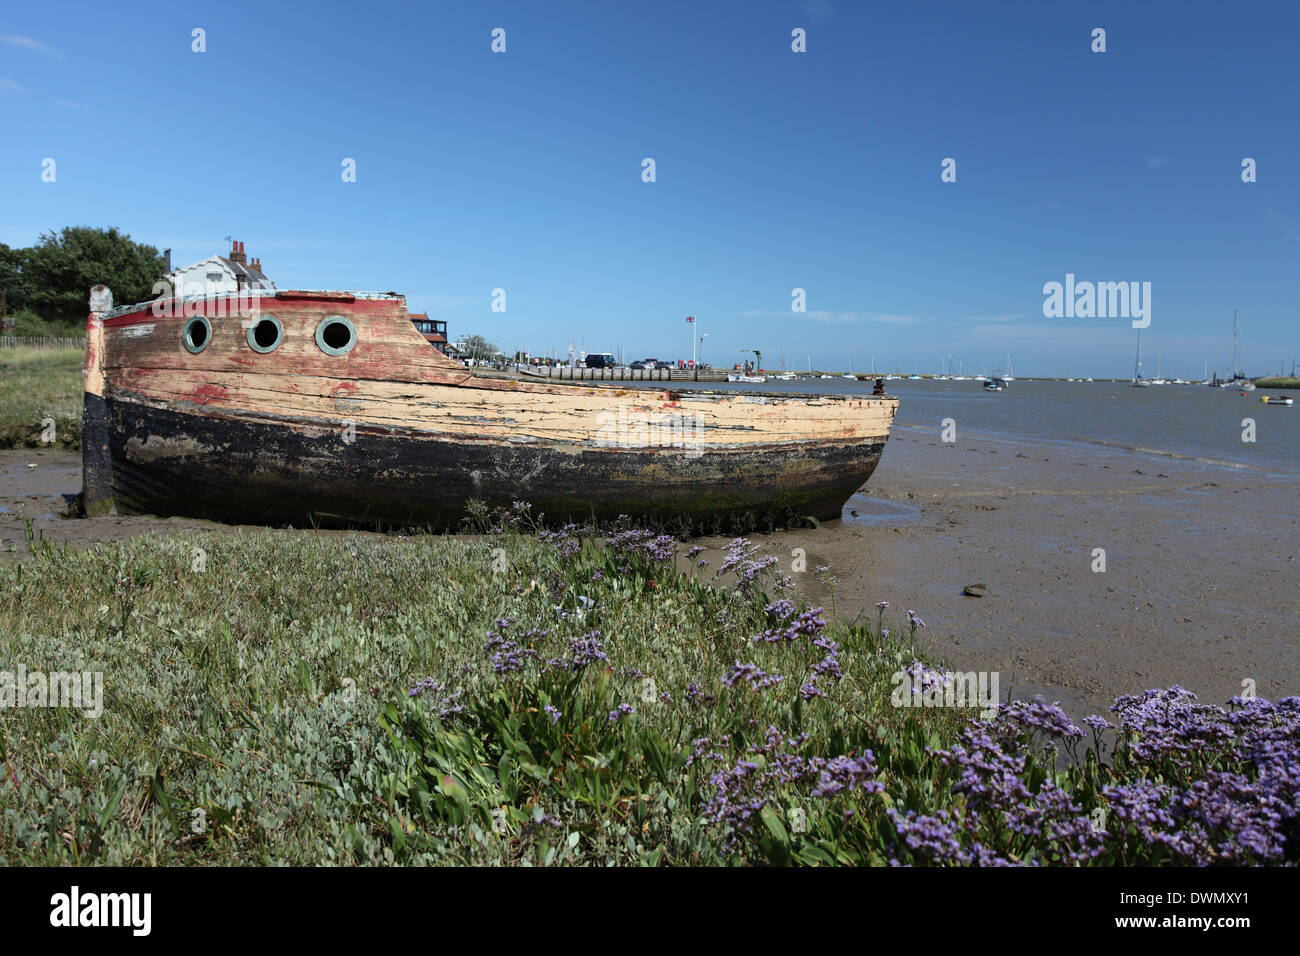 Old abandoned wooden boat on the river Ore, near Orford Quay, Suffolk Stock Photo